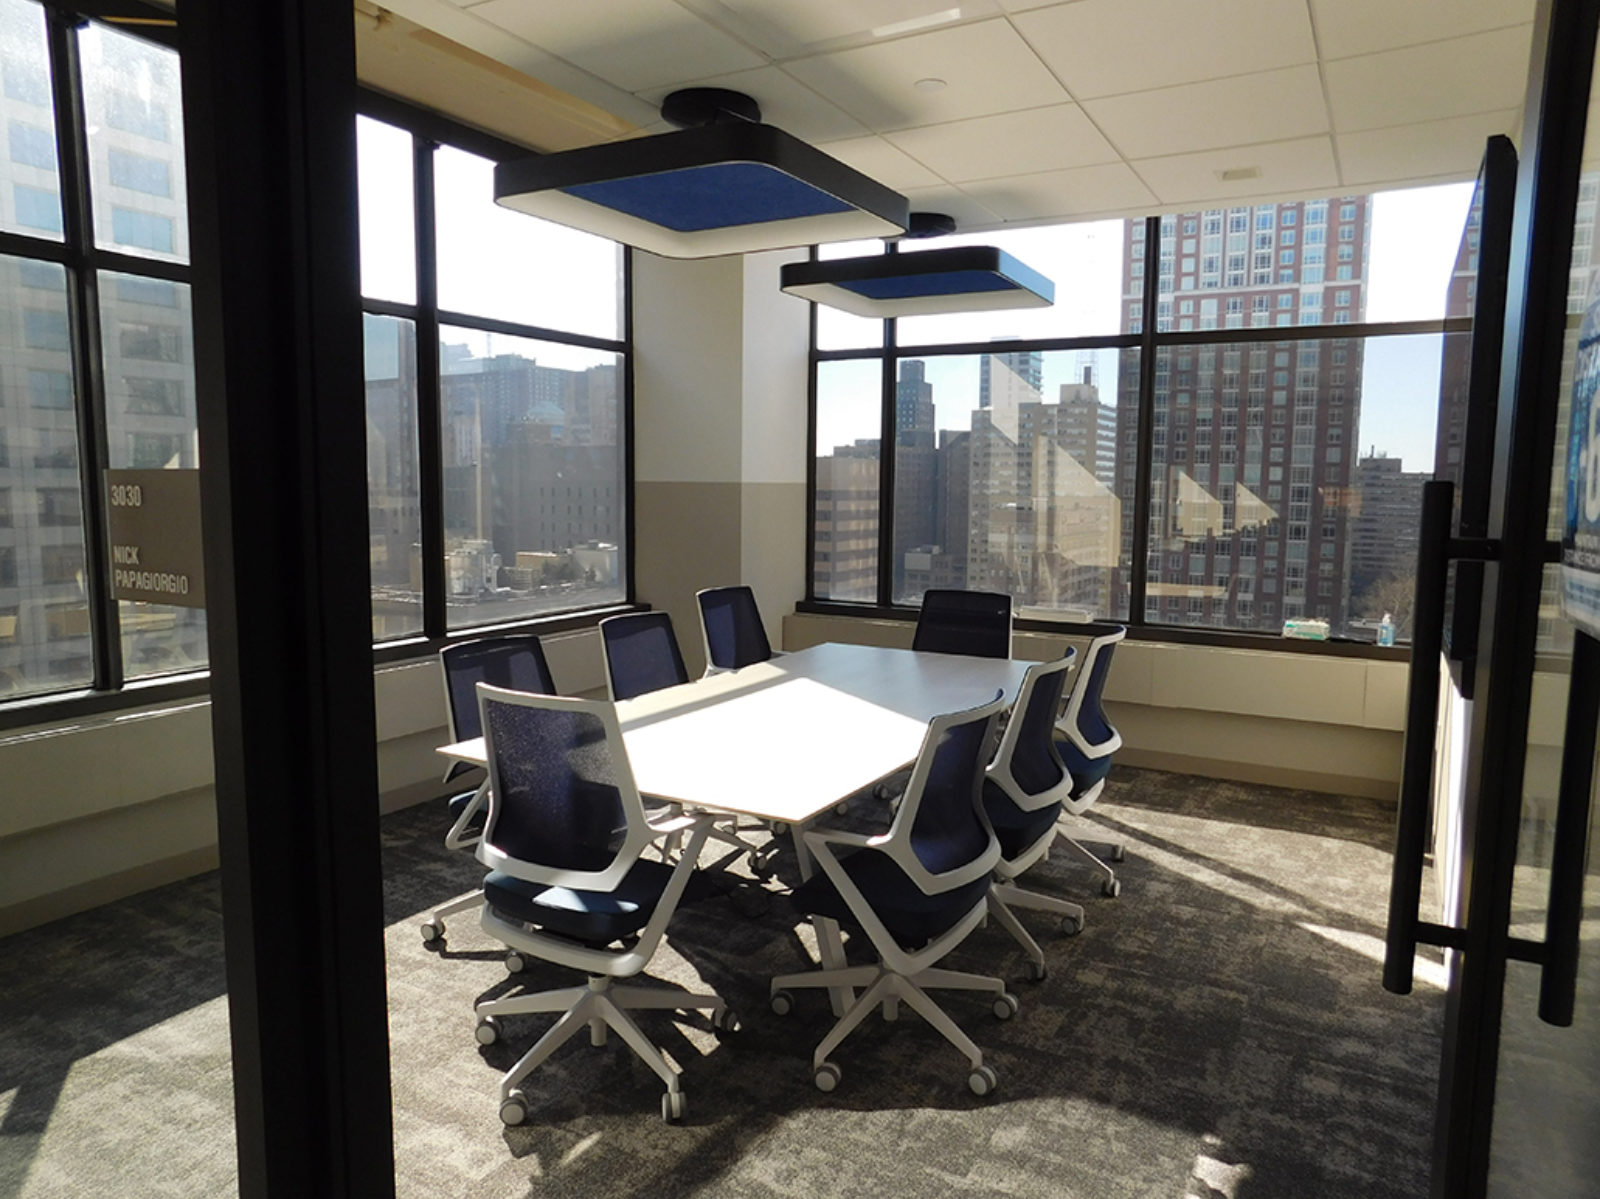 Corner meeting room with a lot of windows, conference table with dark blue mesh chairs around table